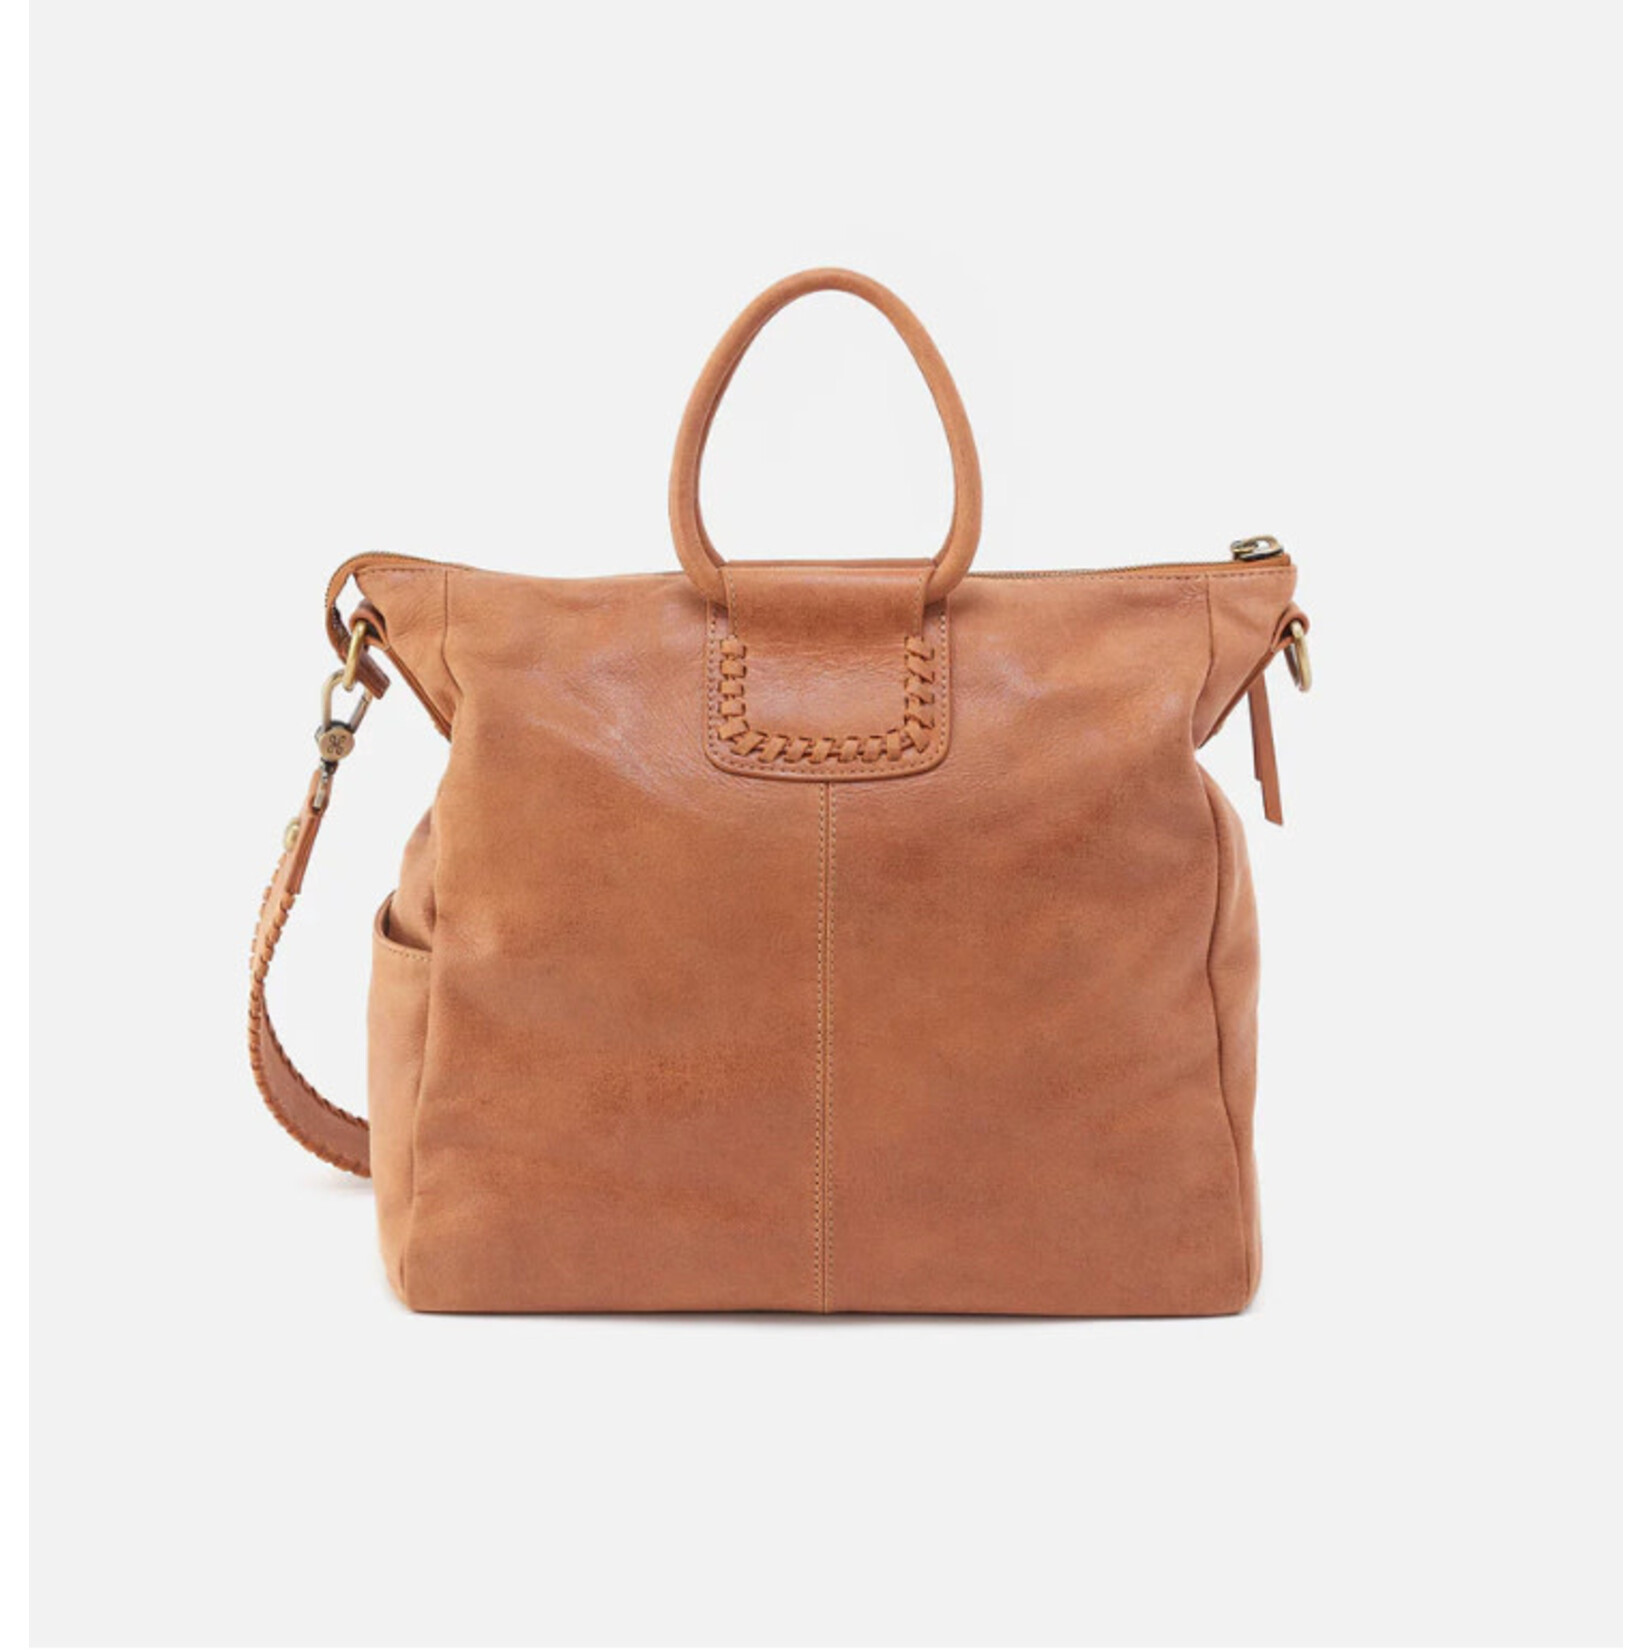 HOBO Sheila Buffed Leather Large Satchel in Whiskey